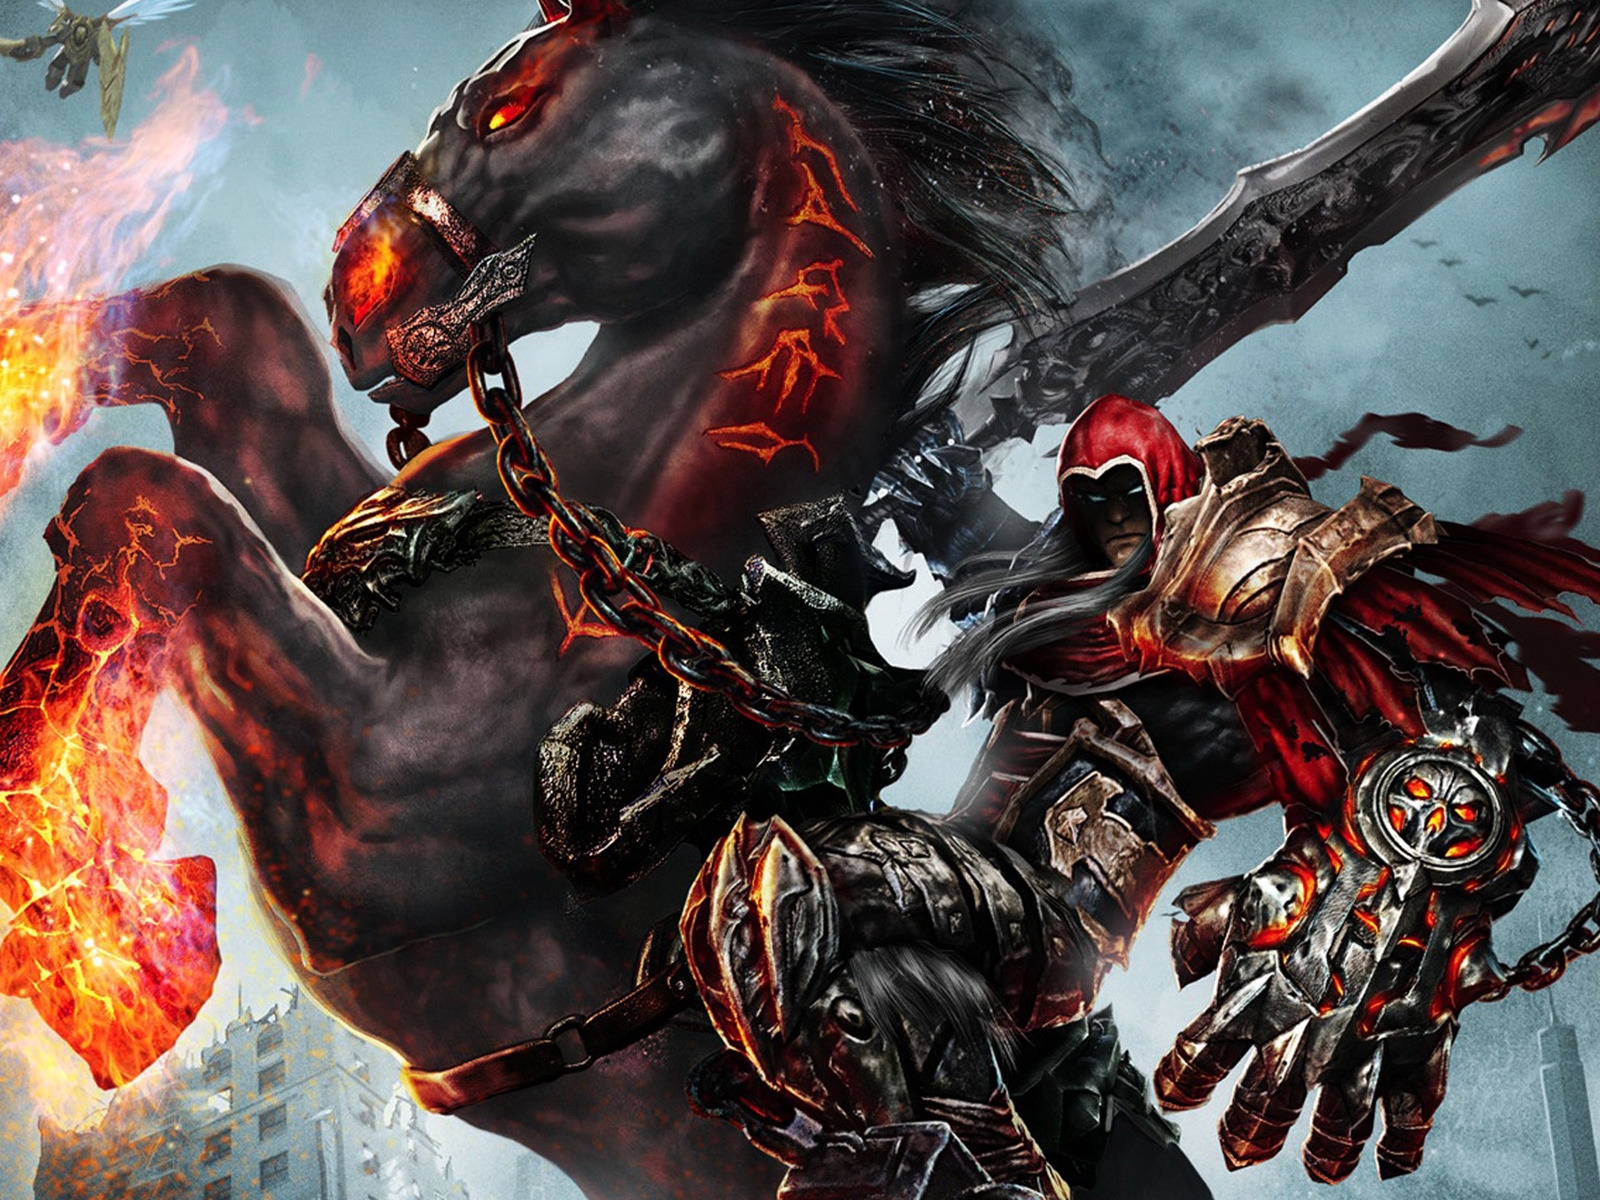 Darksiders Wrath of War Video Game for 1600 x 1200 resolution